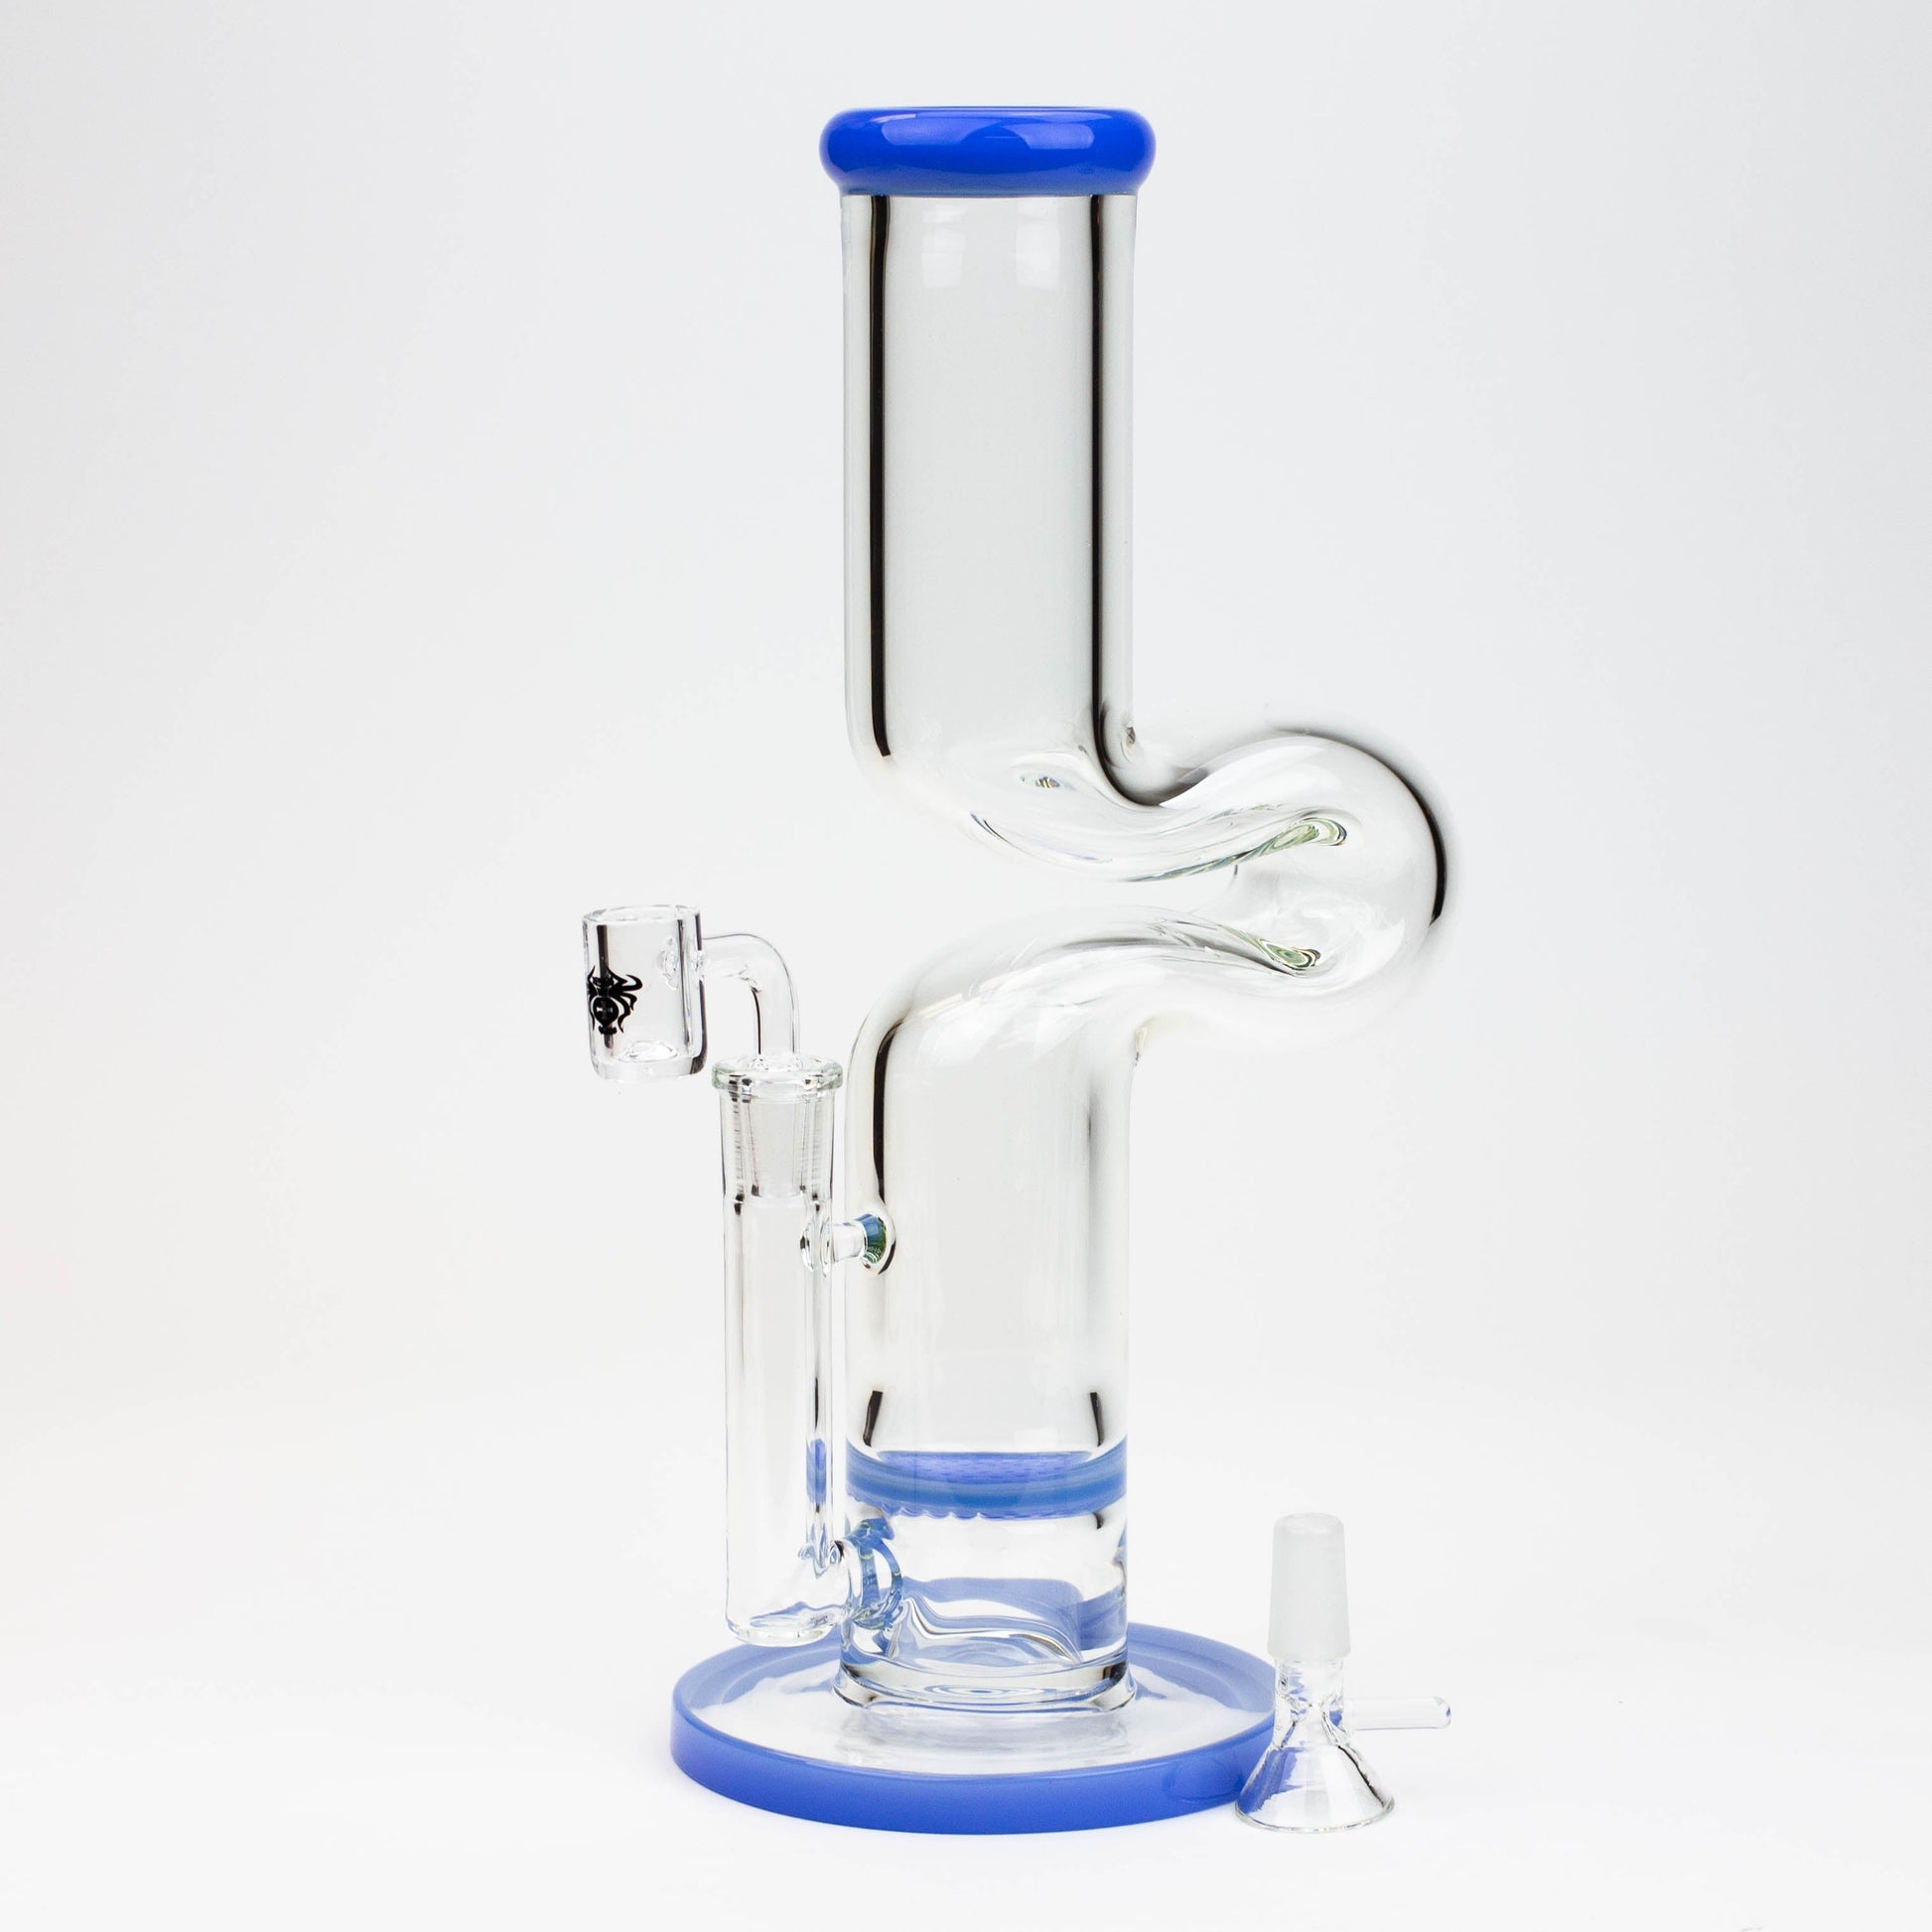 11.5" 2-in-1 7mm Kink glass water bong_6